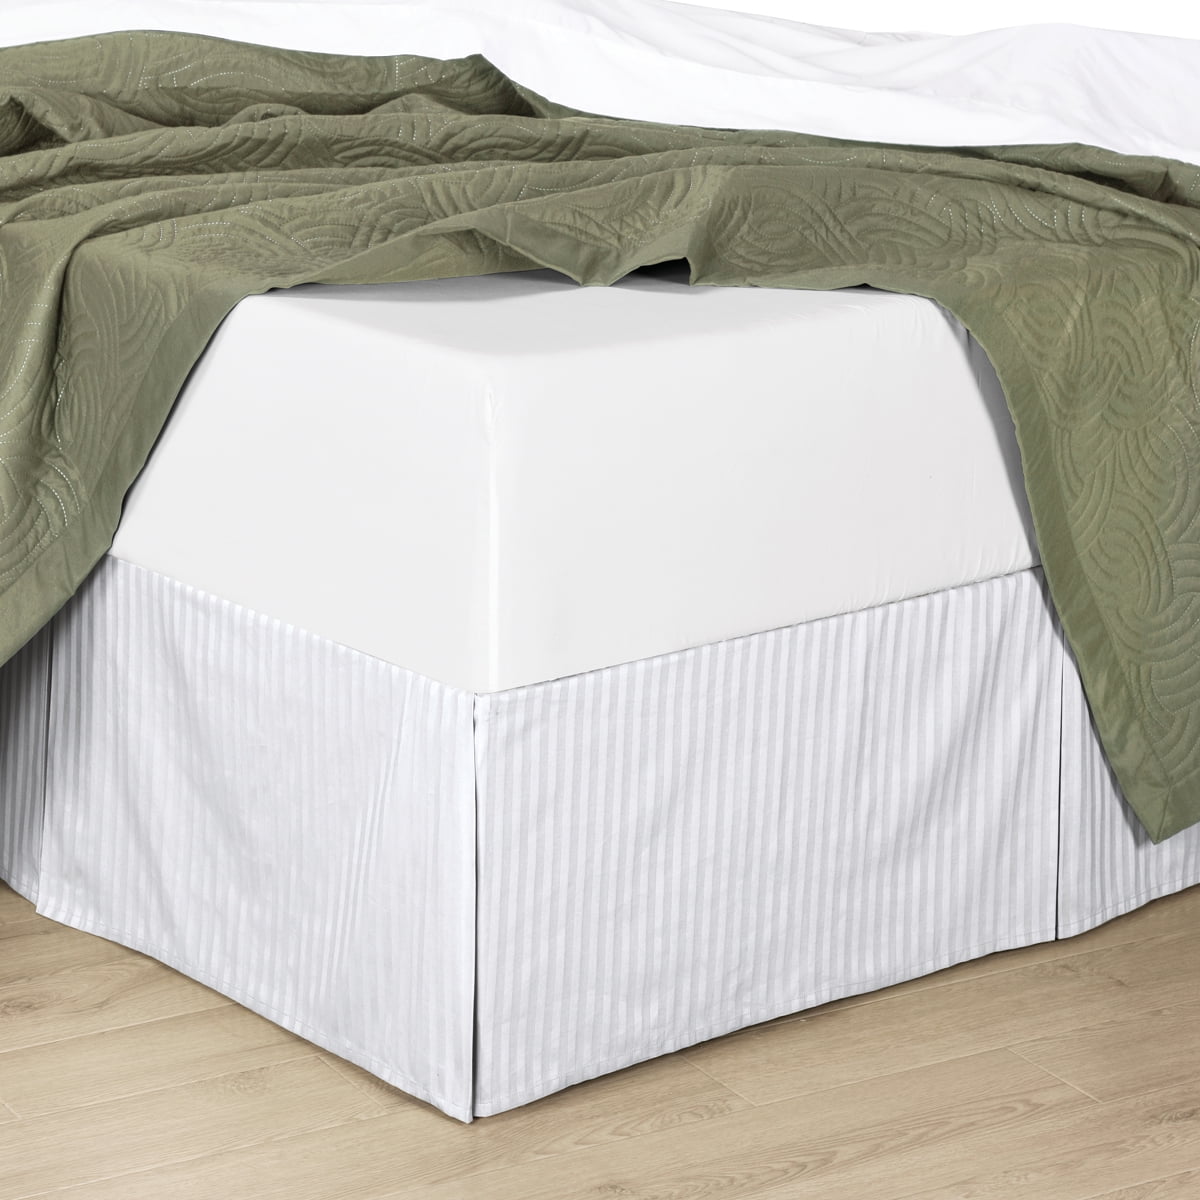 Details about   Wrap Around Bed Skirt with Split Corners Microfiber Light grey All Size & drop 